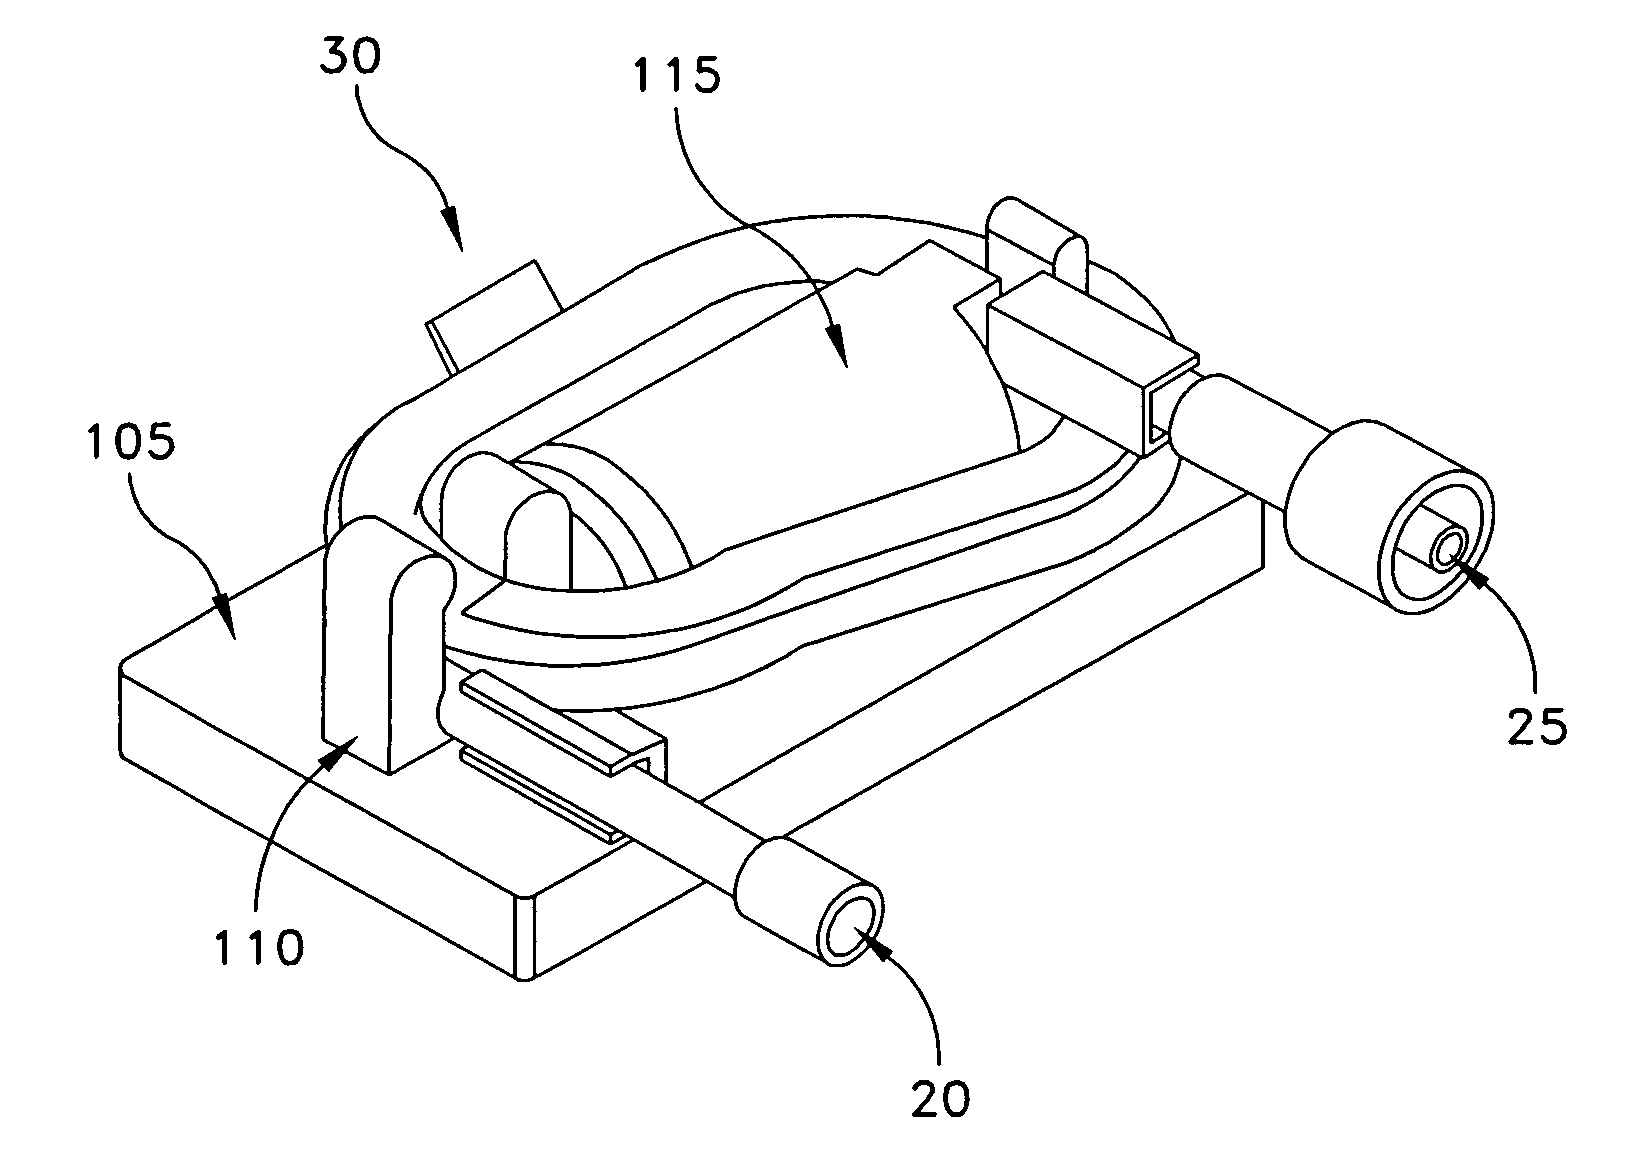 System for detecting and removing a gas bubble from a vascular infusion line